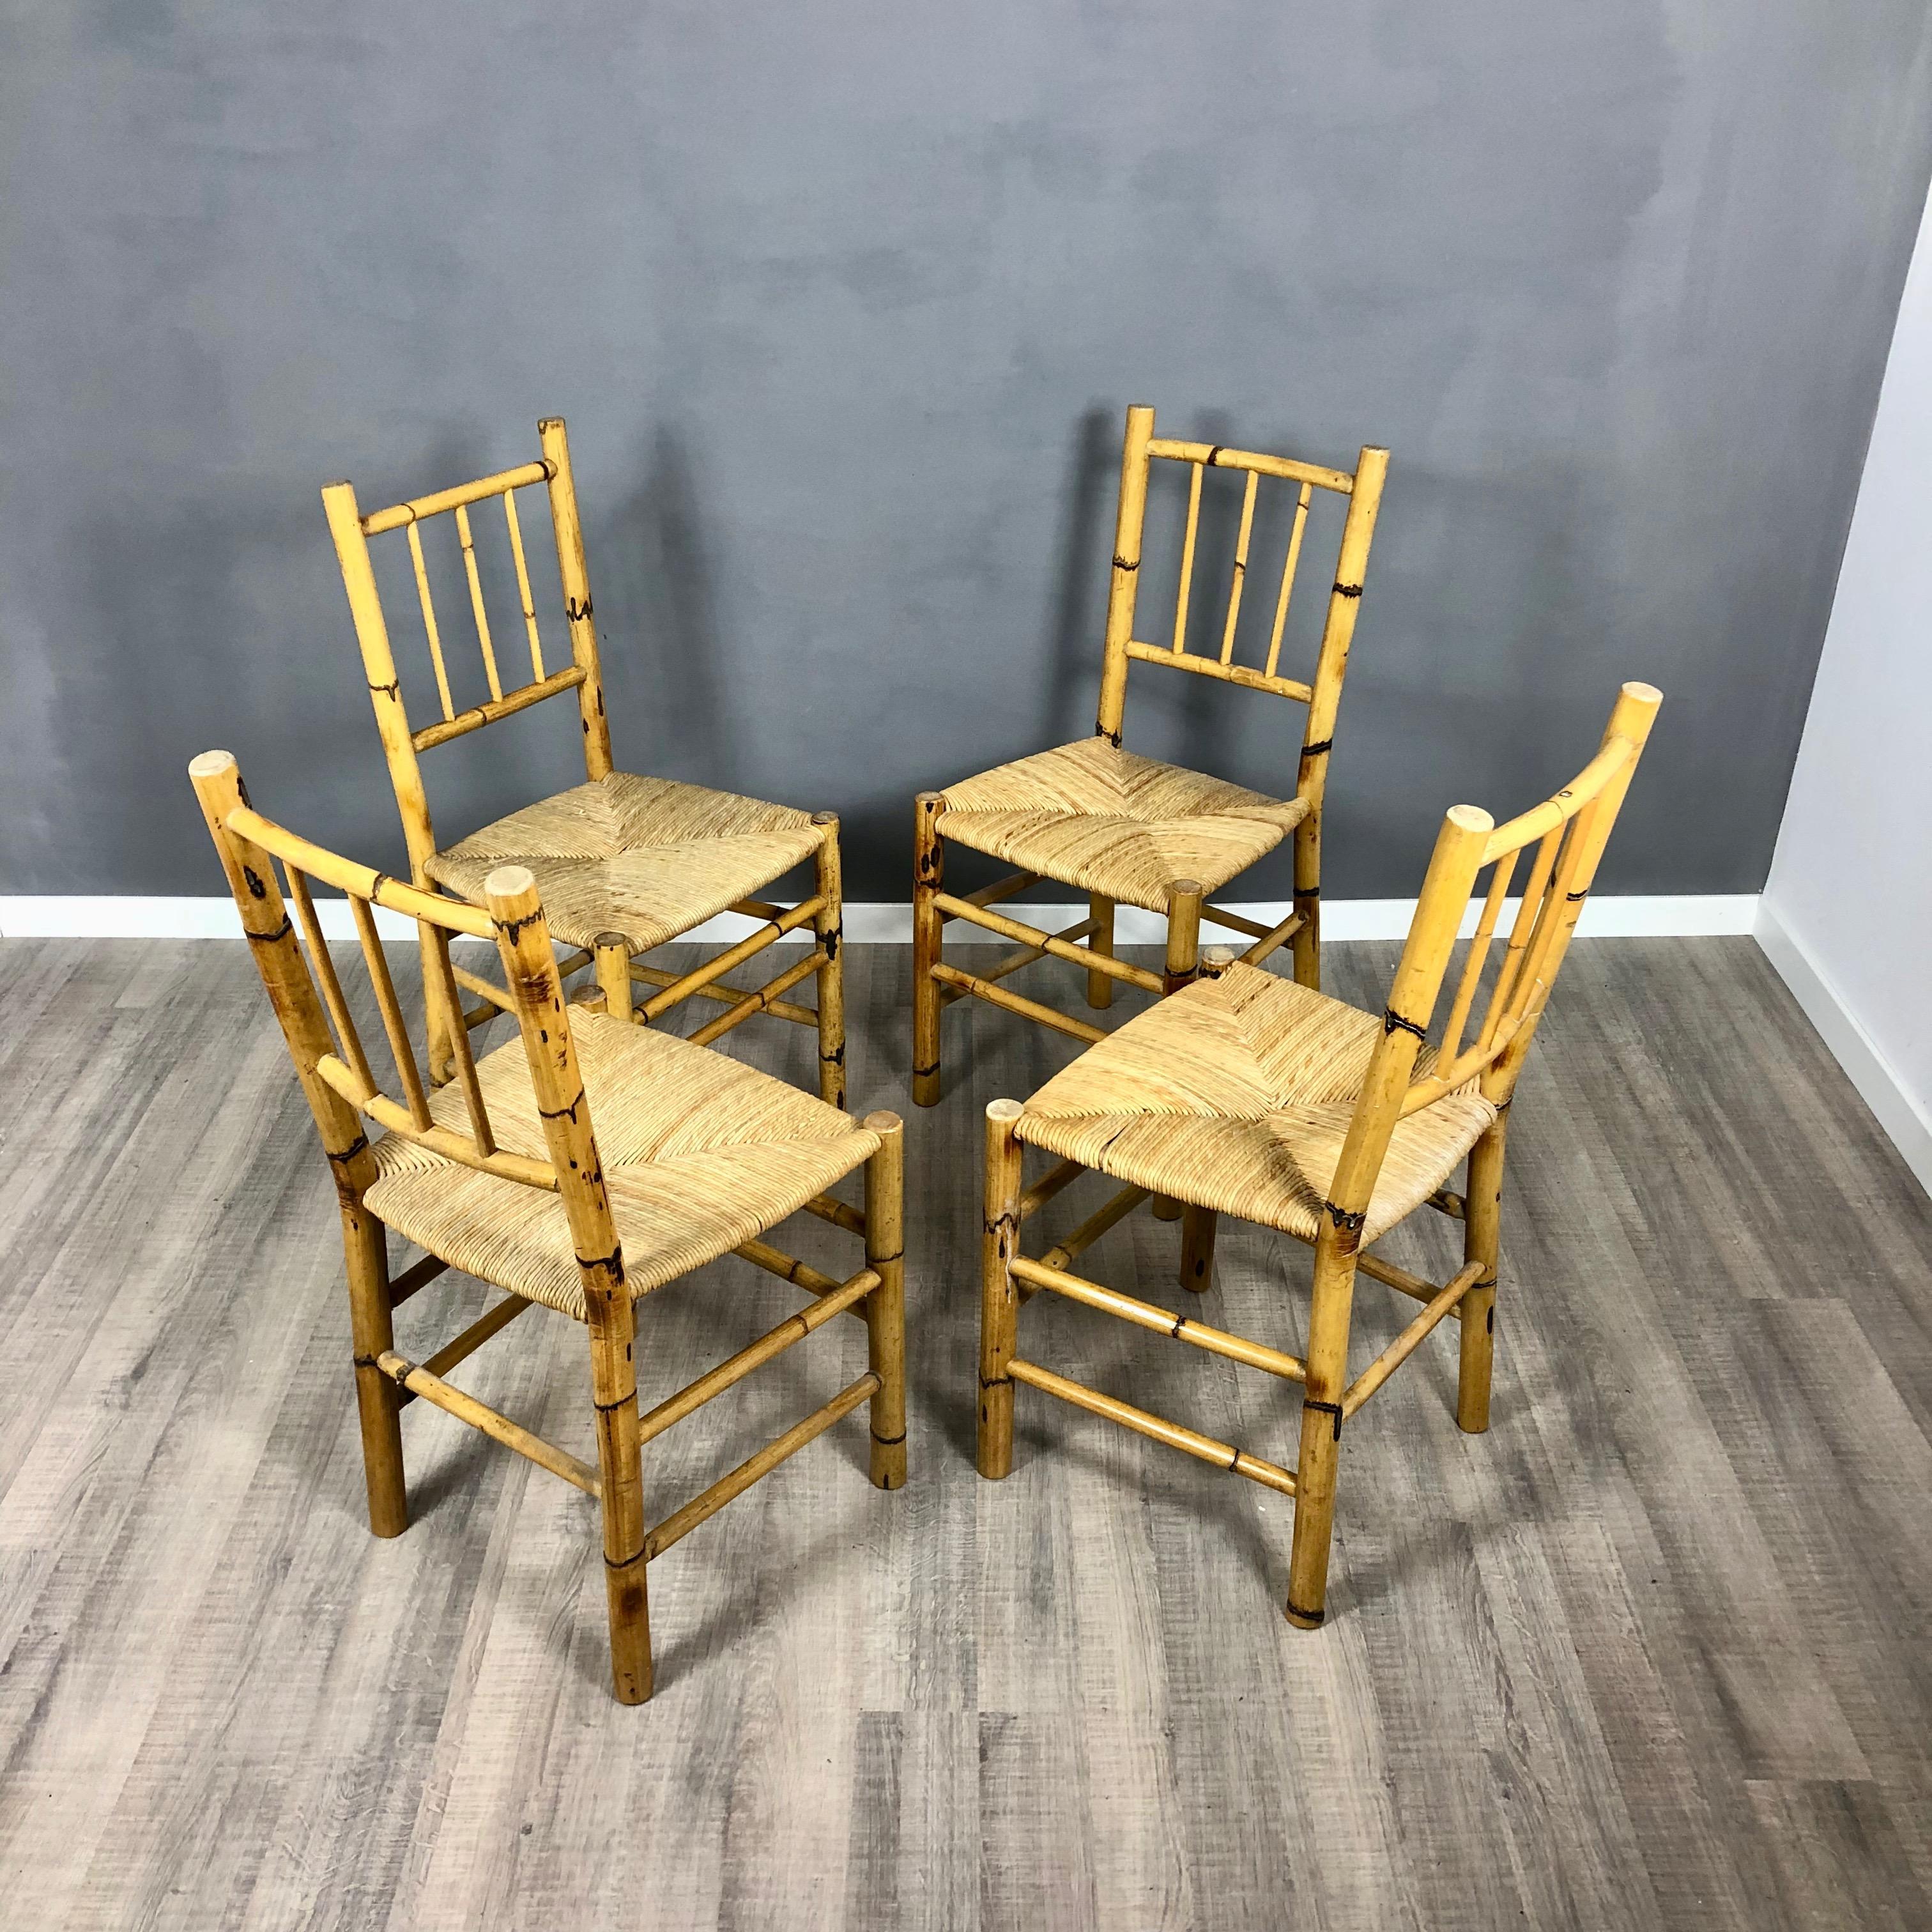 Italian Set of Four Straw and Bamboo Vintage Chairs, Italy, 1960s For Sale